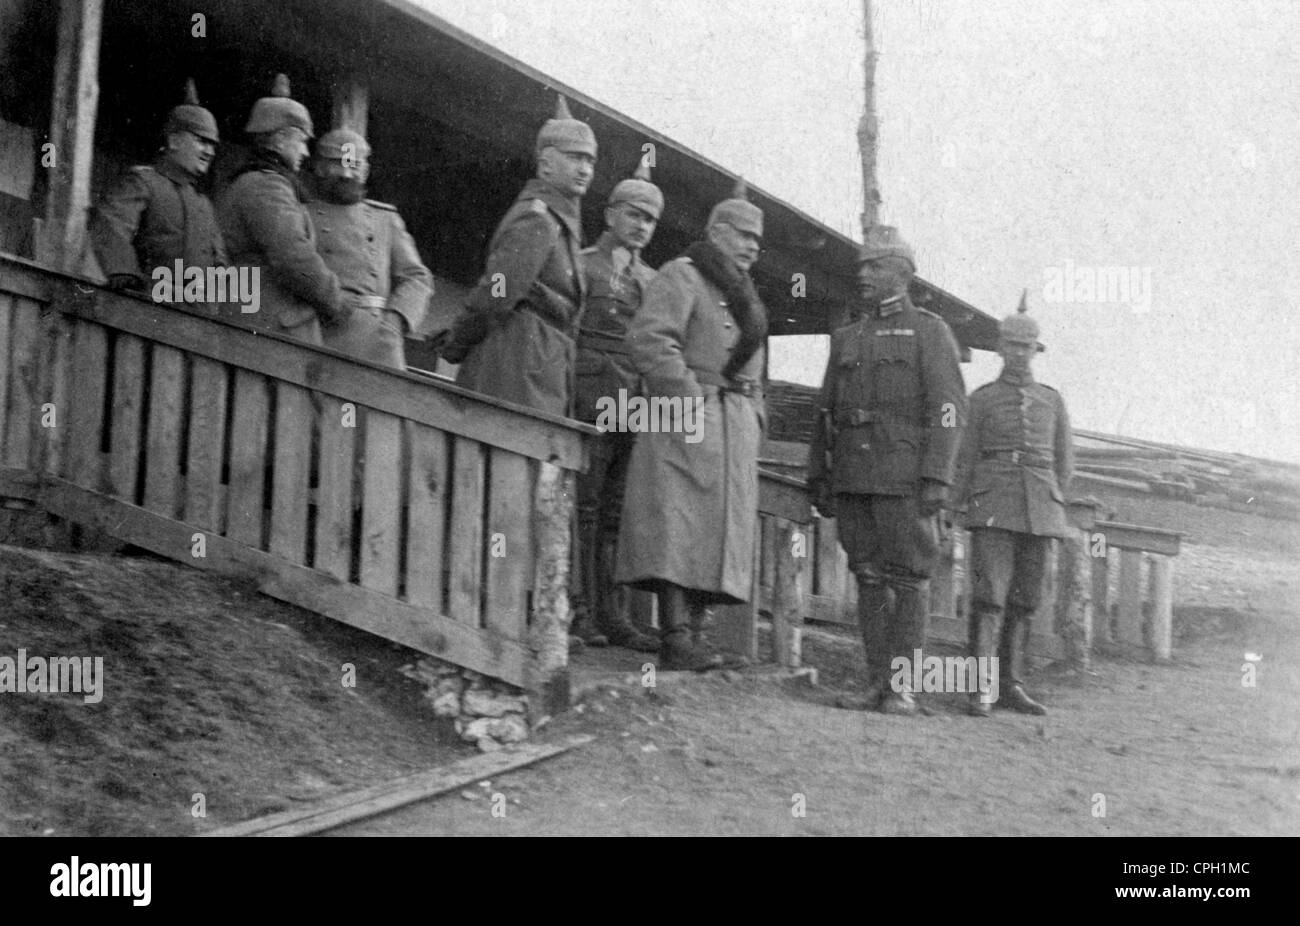 events, First World War / WWI, Balkans, officers of a German railway pioneer unit during the opening of a new field railway line near Prilep, Macedonia, 22.2.1917, 20th century, historic, historical, 1910s, 10s, army, military, Germany, German Reich, Empire, uniform, uniforms, engineers, officer, supply, supplies, rear area, Royal Bavarian Railway Battalion 22, people, Additional-Rights-Clearences-Not Available Stock Photo